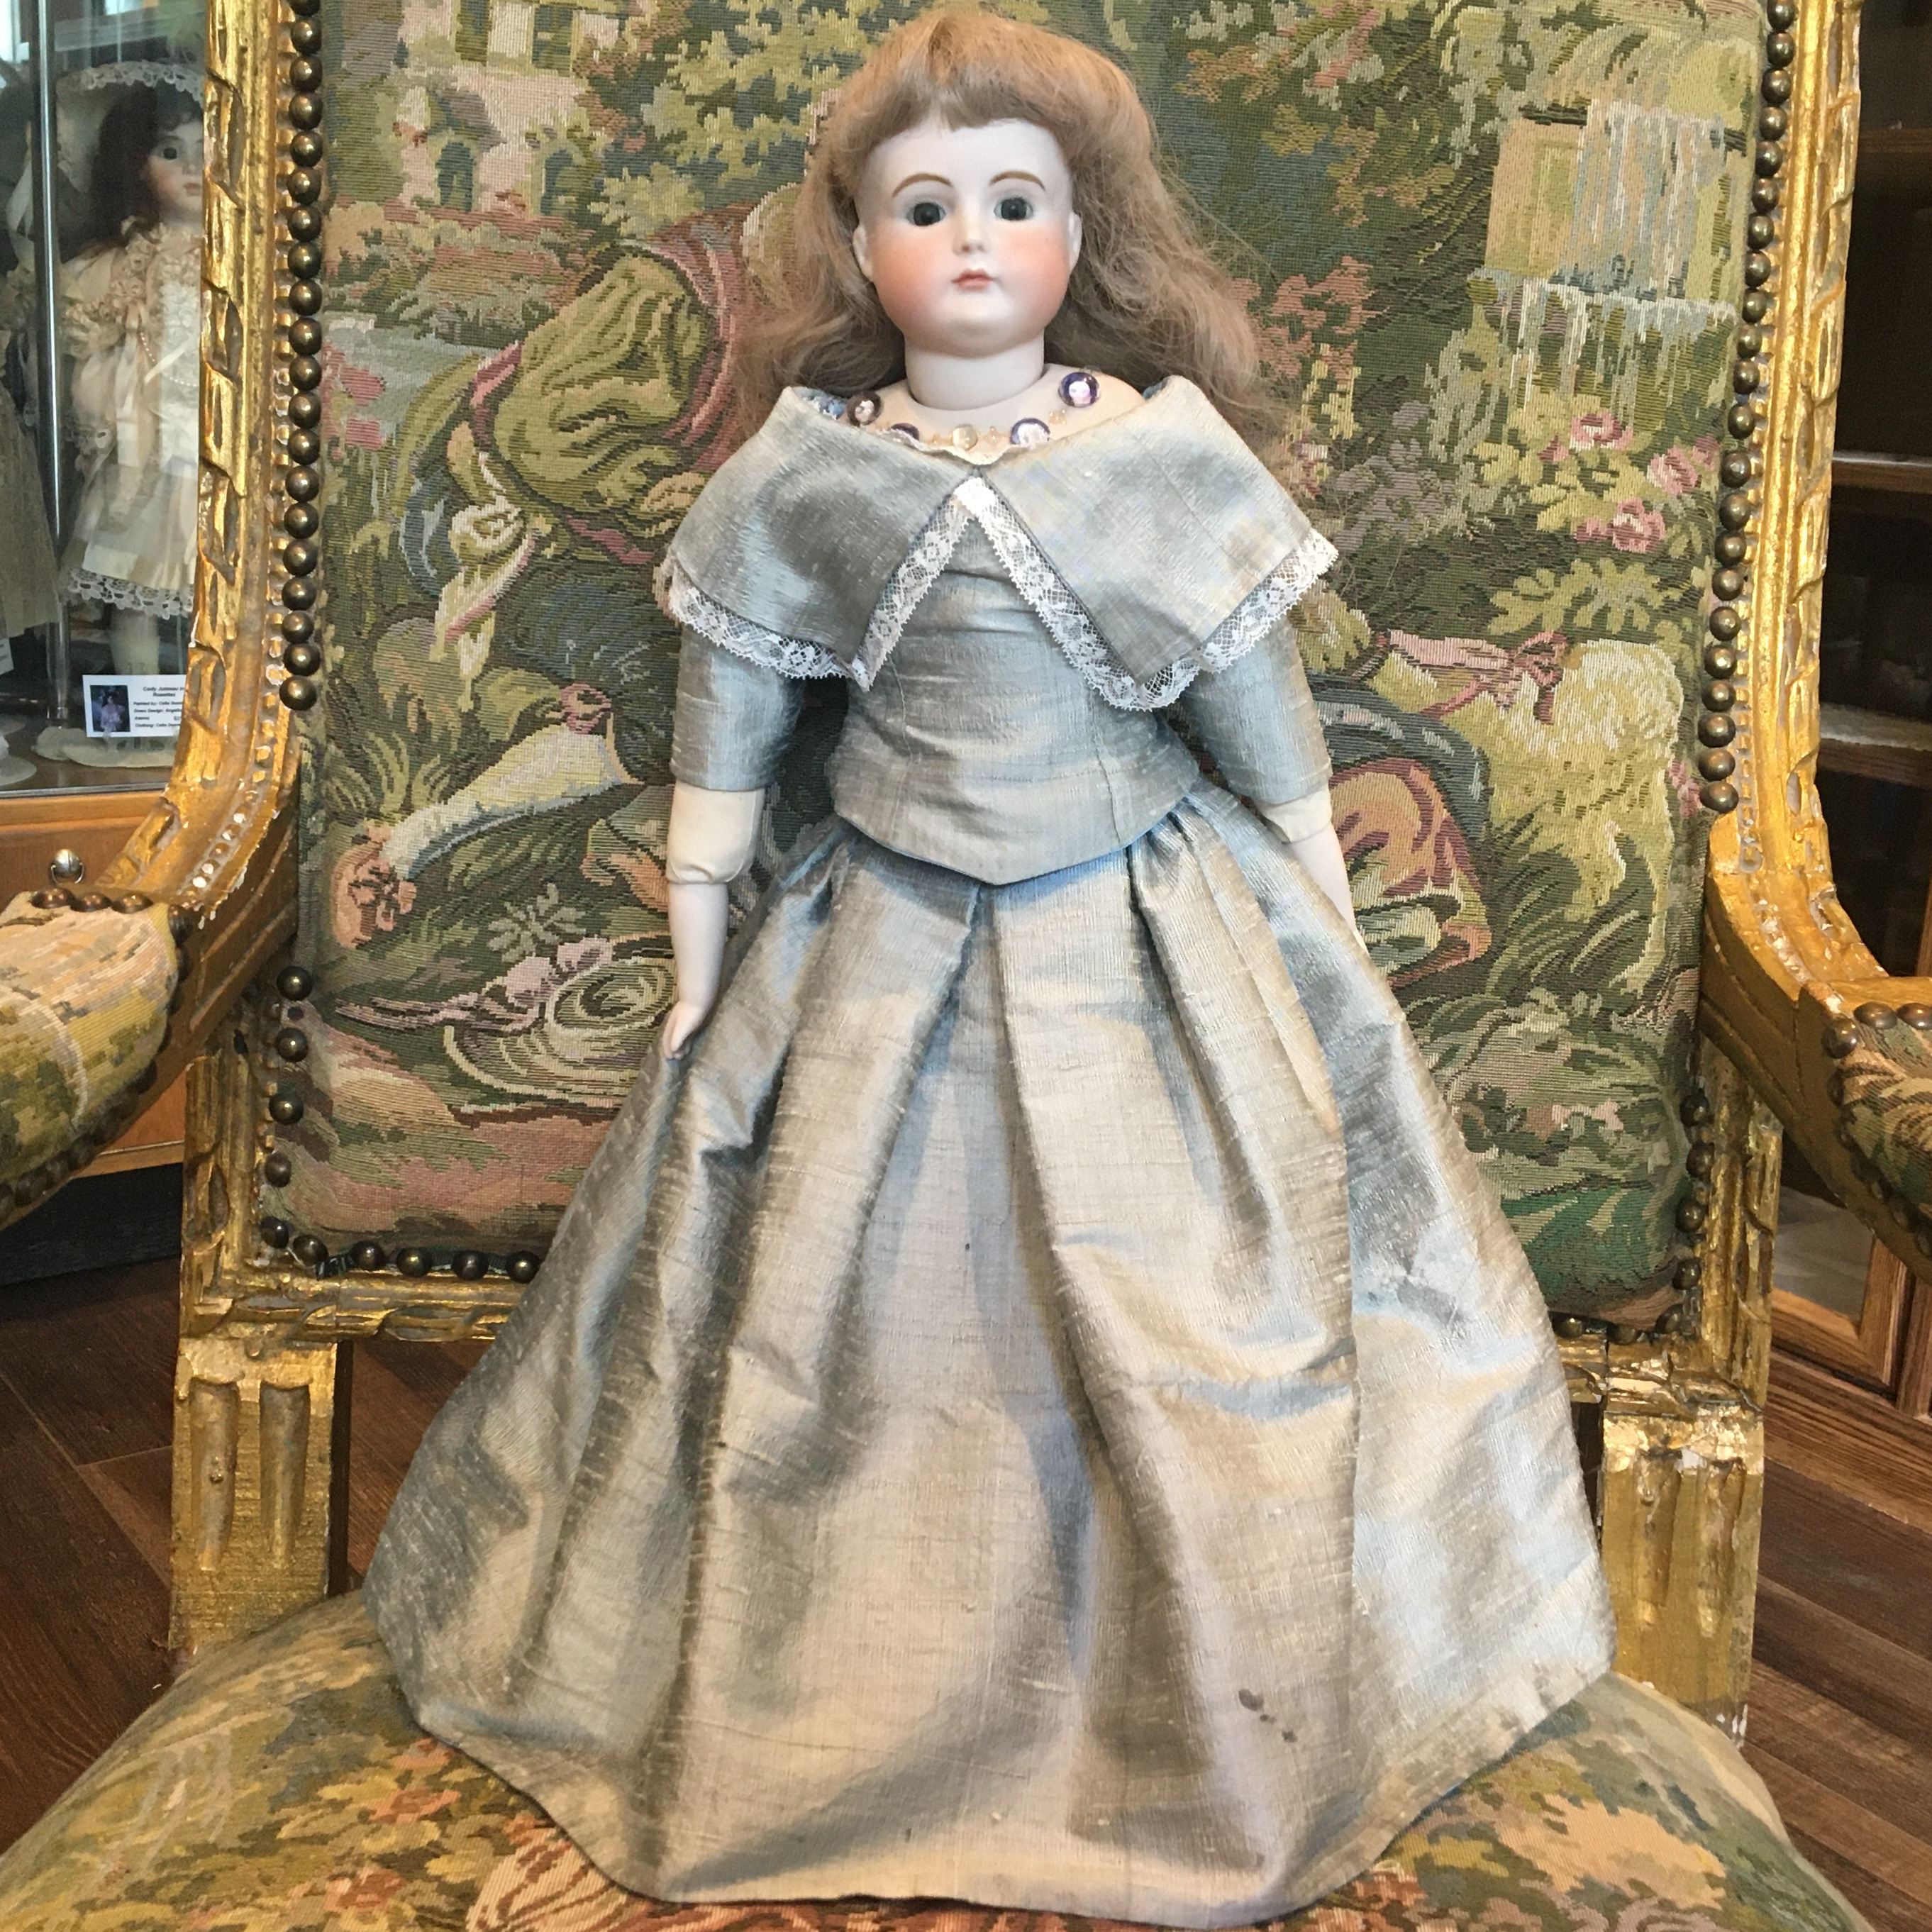 Reproduction XI Girl with inset cabochons around collarbone, depicting other dolls, front view